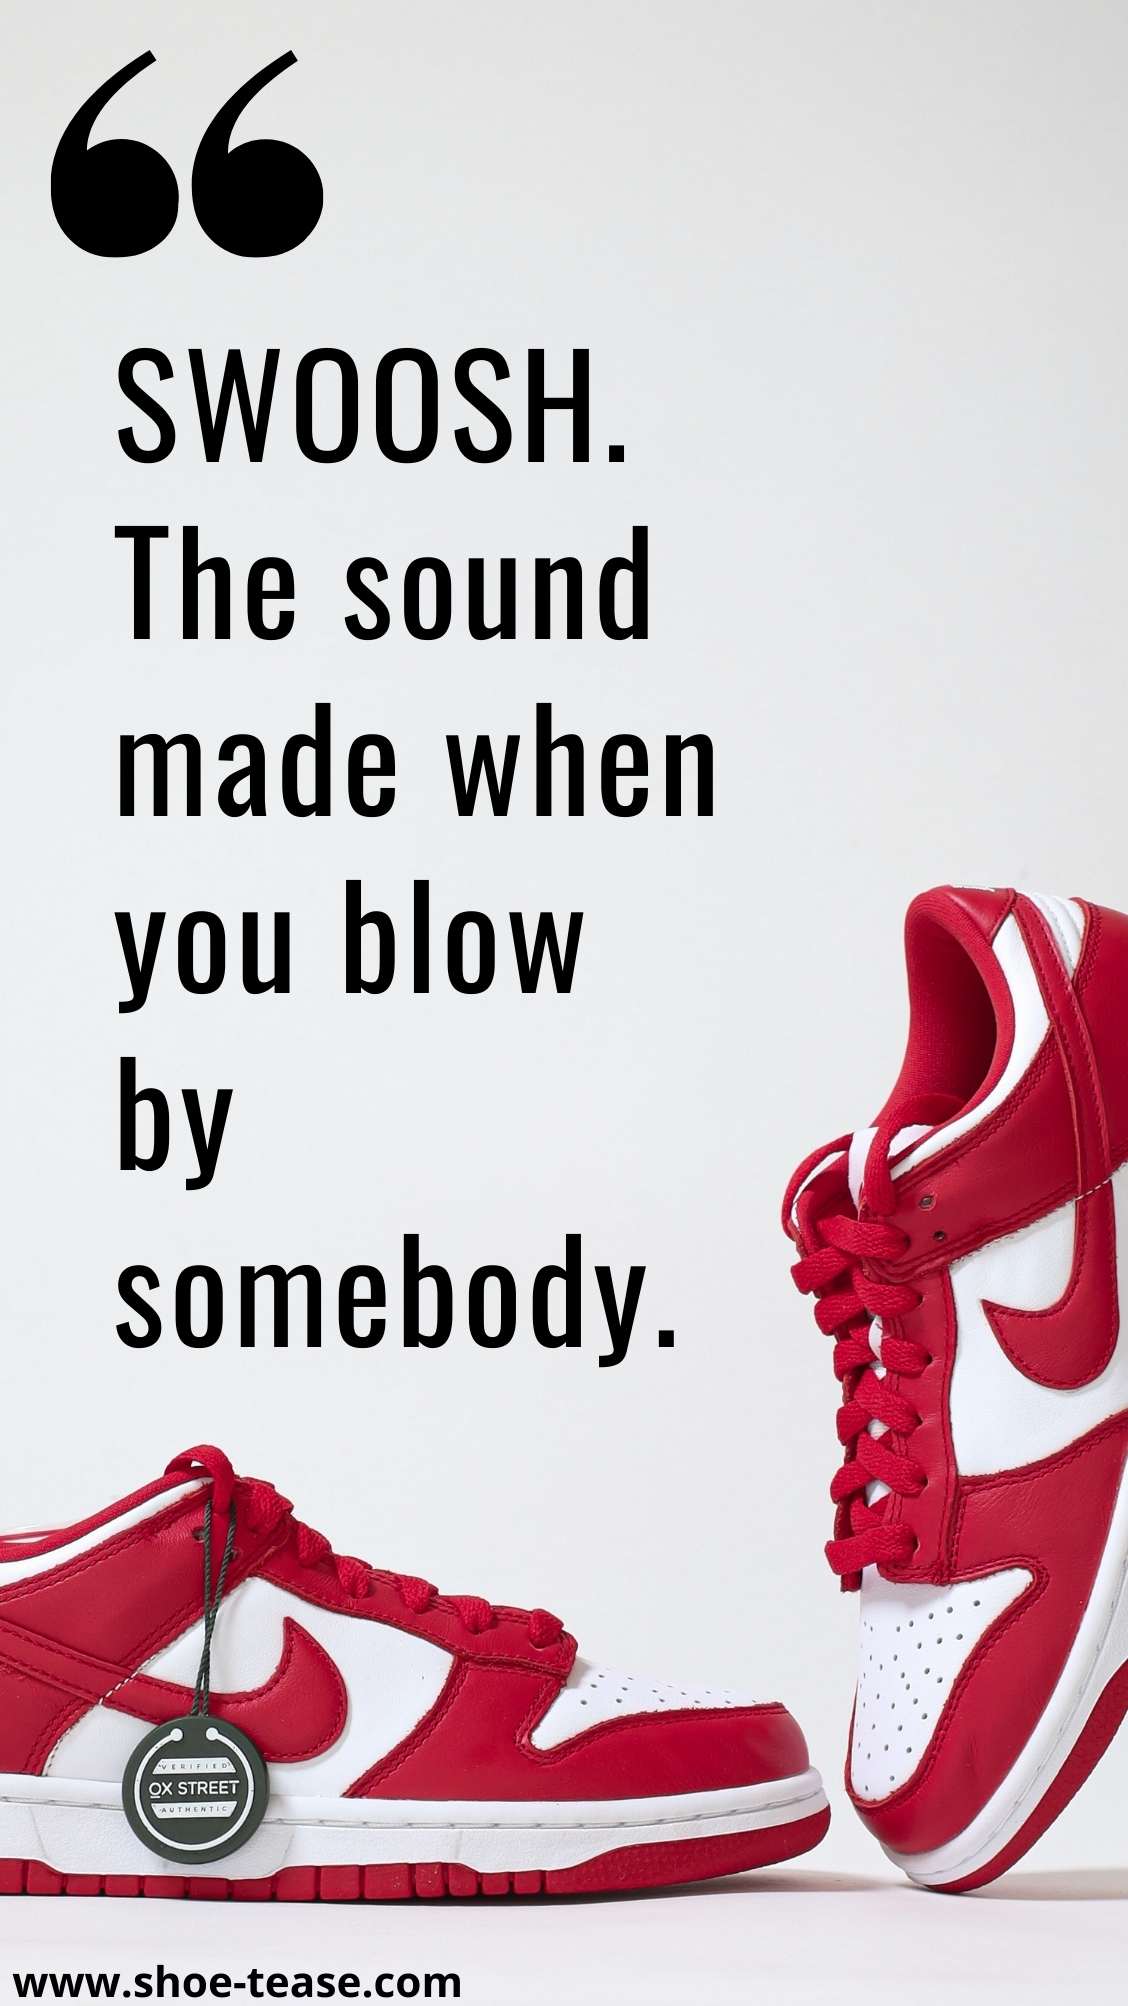 Nike Quote reading SWOOSH. The sound made when you blow by somebody over a pair of red and white sneakers.